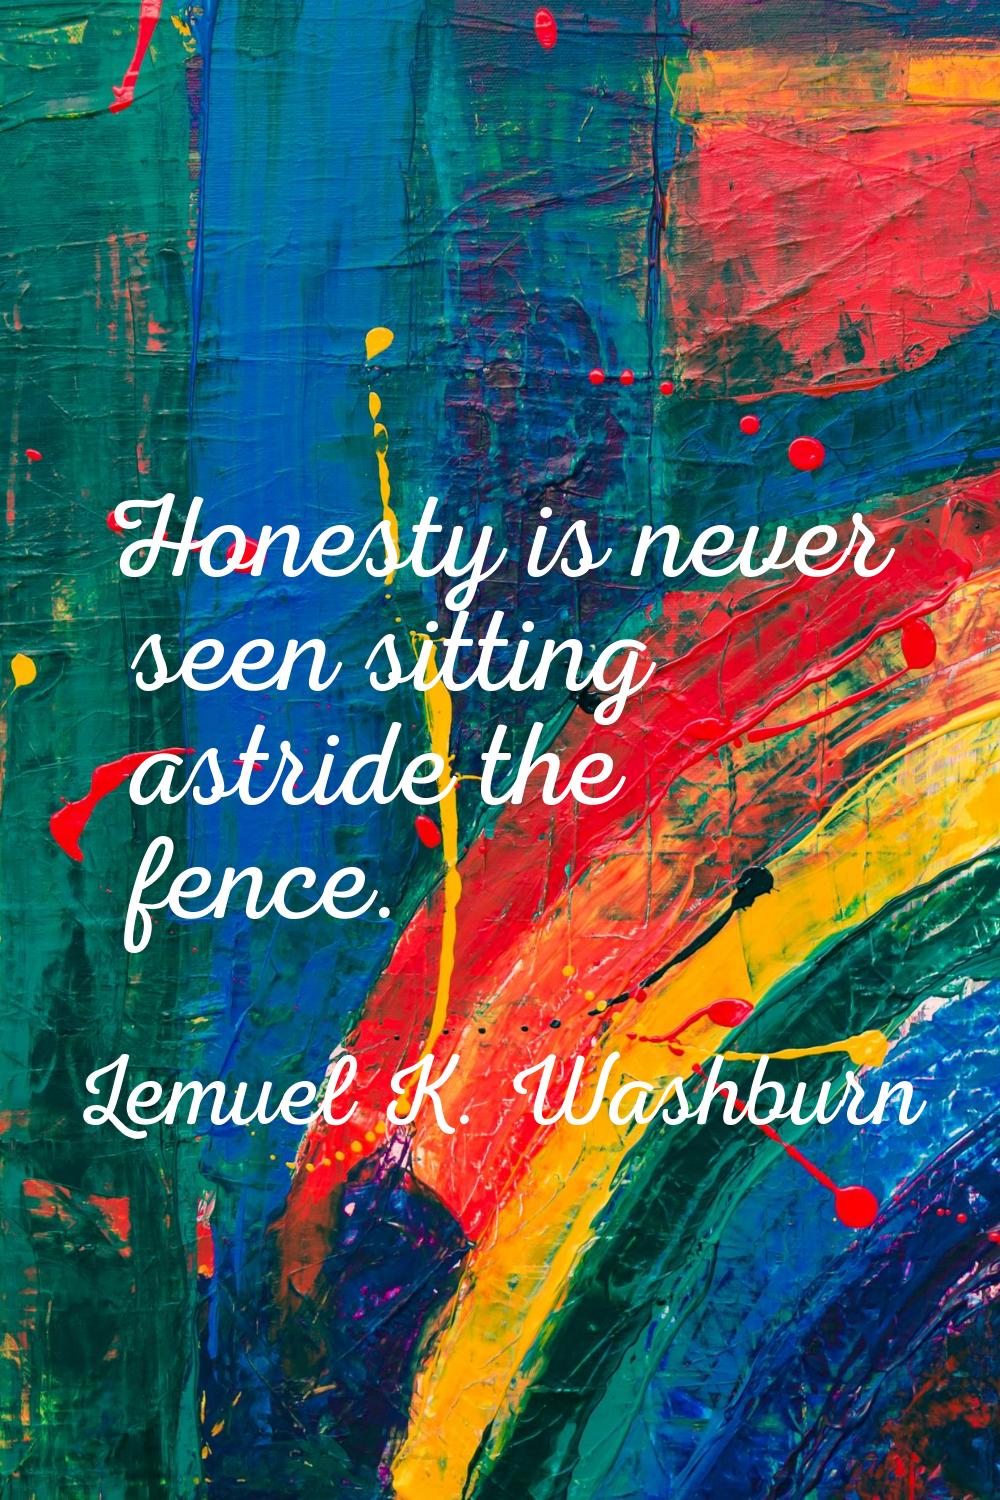 Honesty is never seen sitting astride the fence.